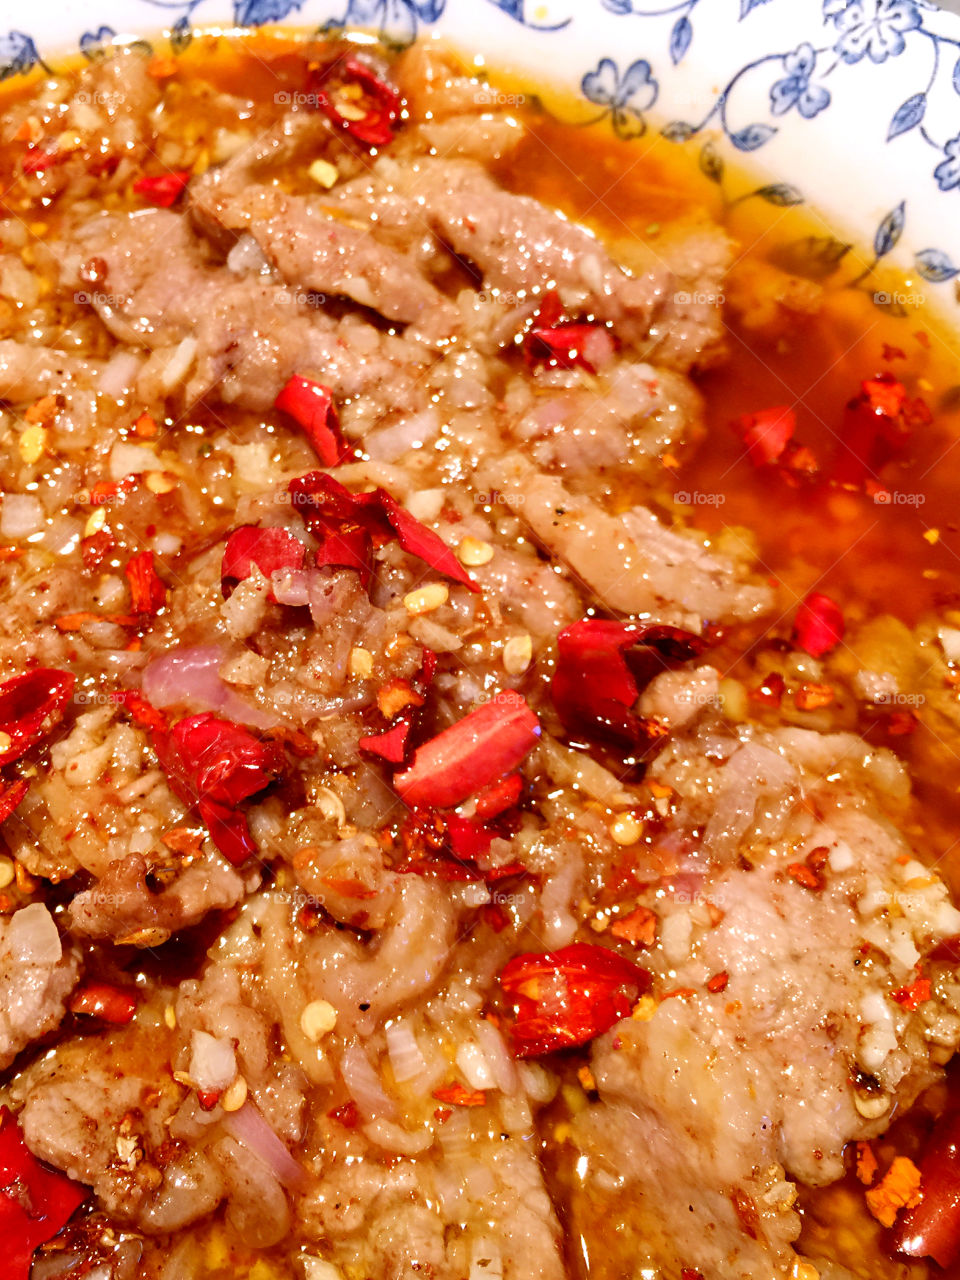 Boiled Beef in Chili Soup